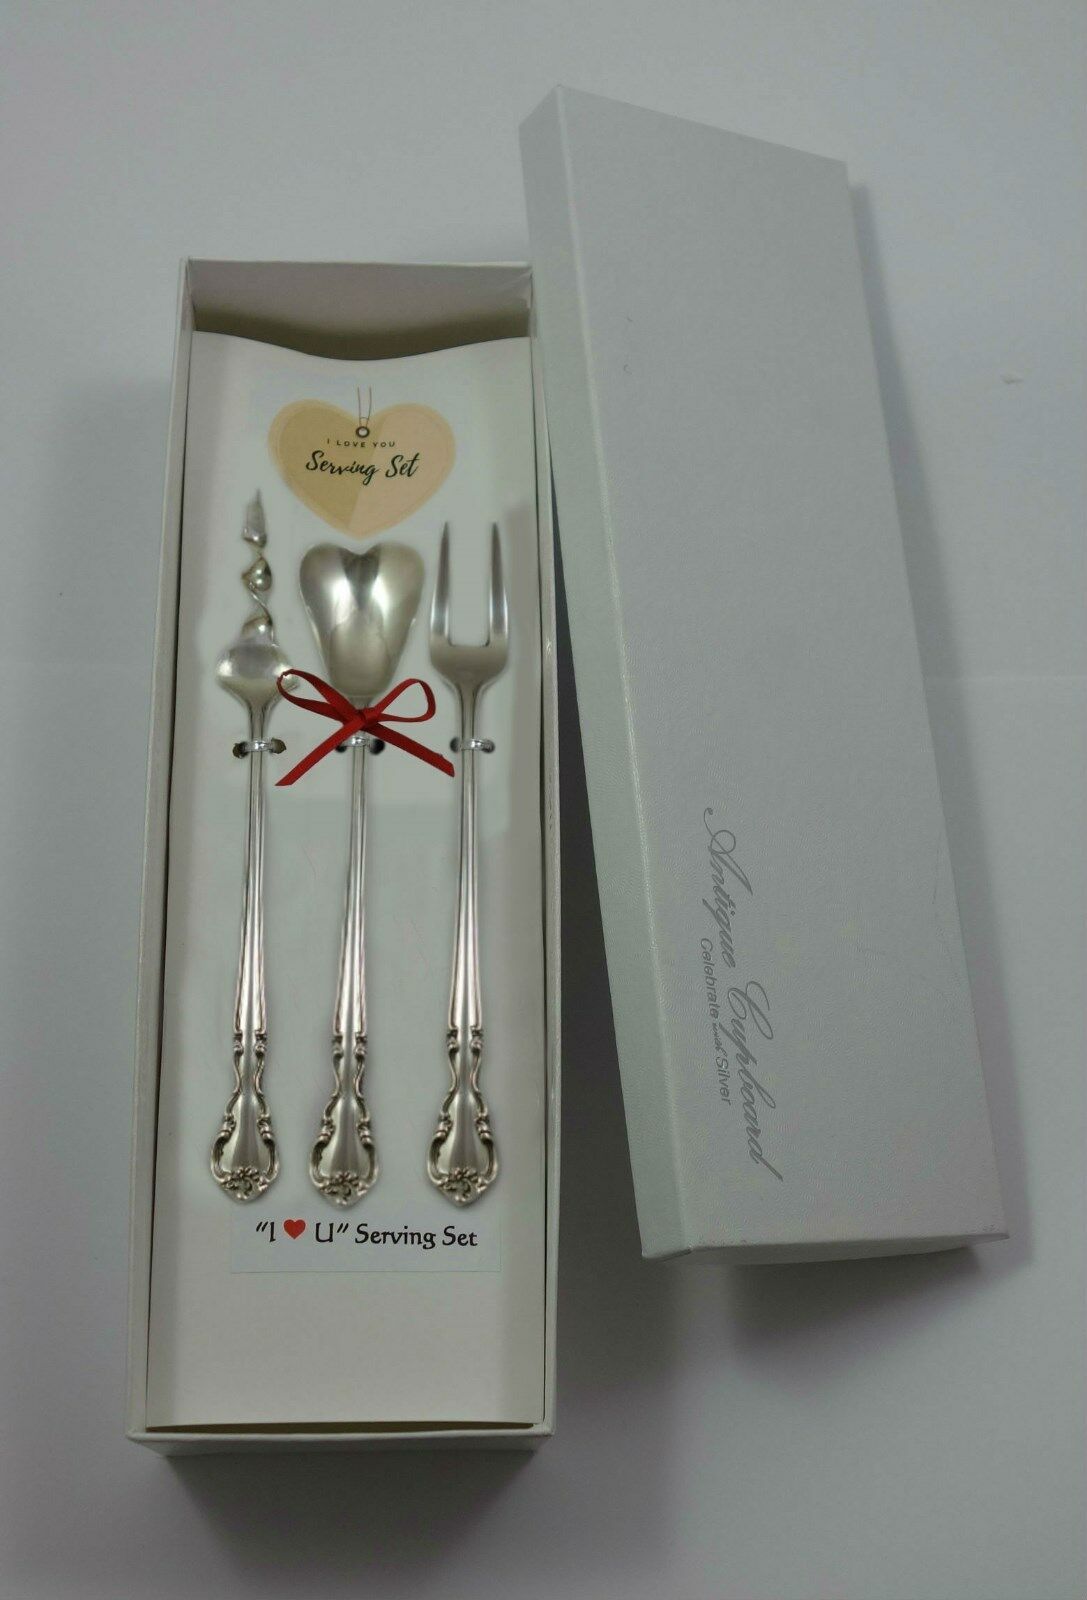 American Classic by Easterling Sterling Silver "I Love You" Serving Set Custom - $193.05